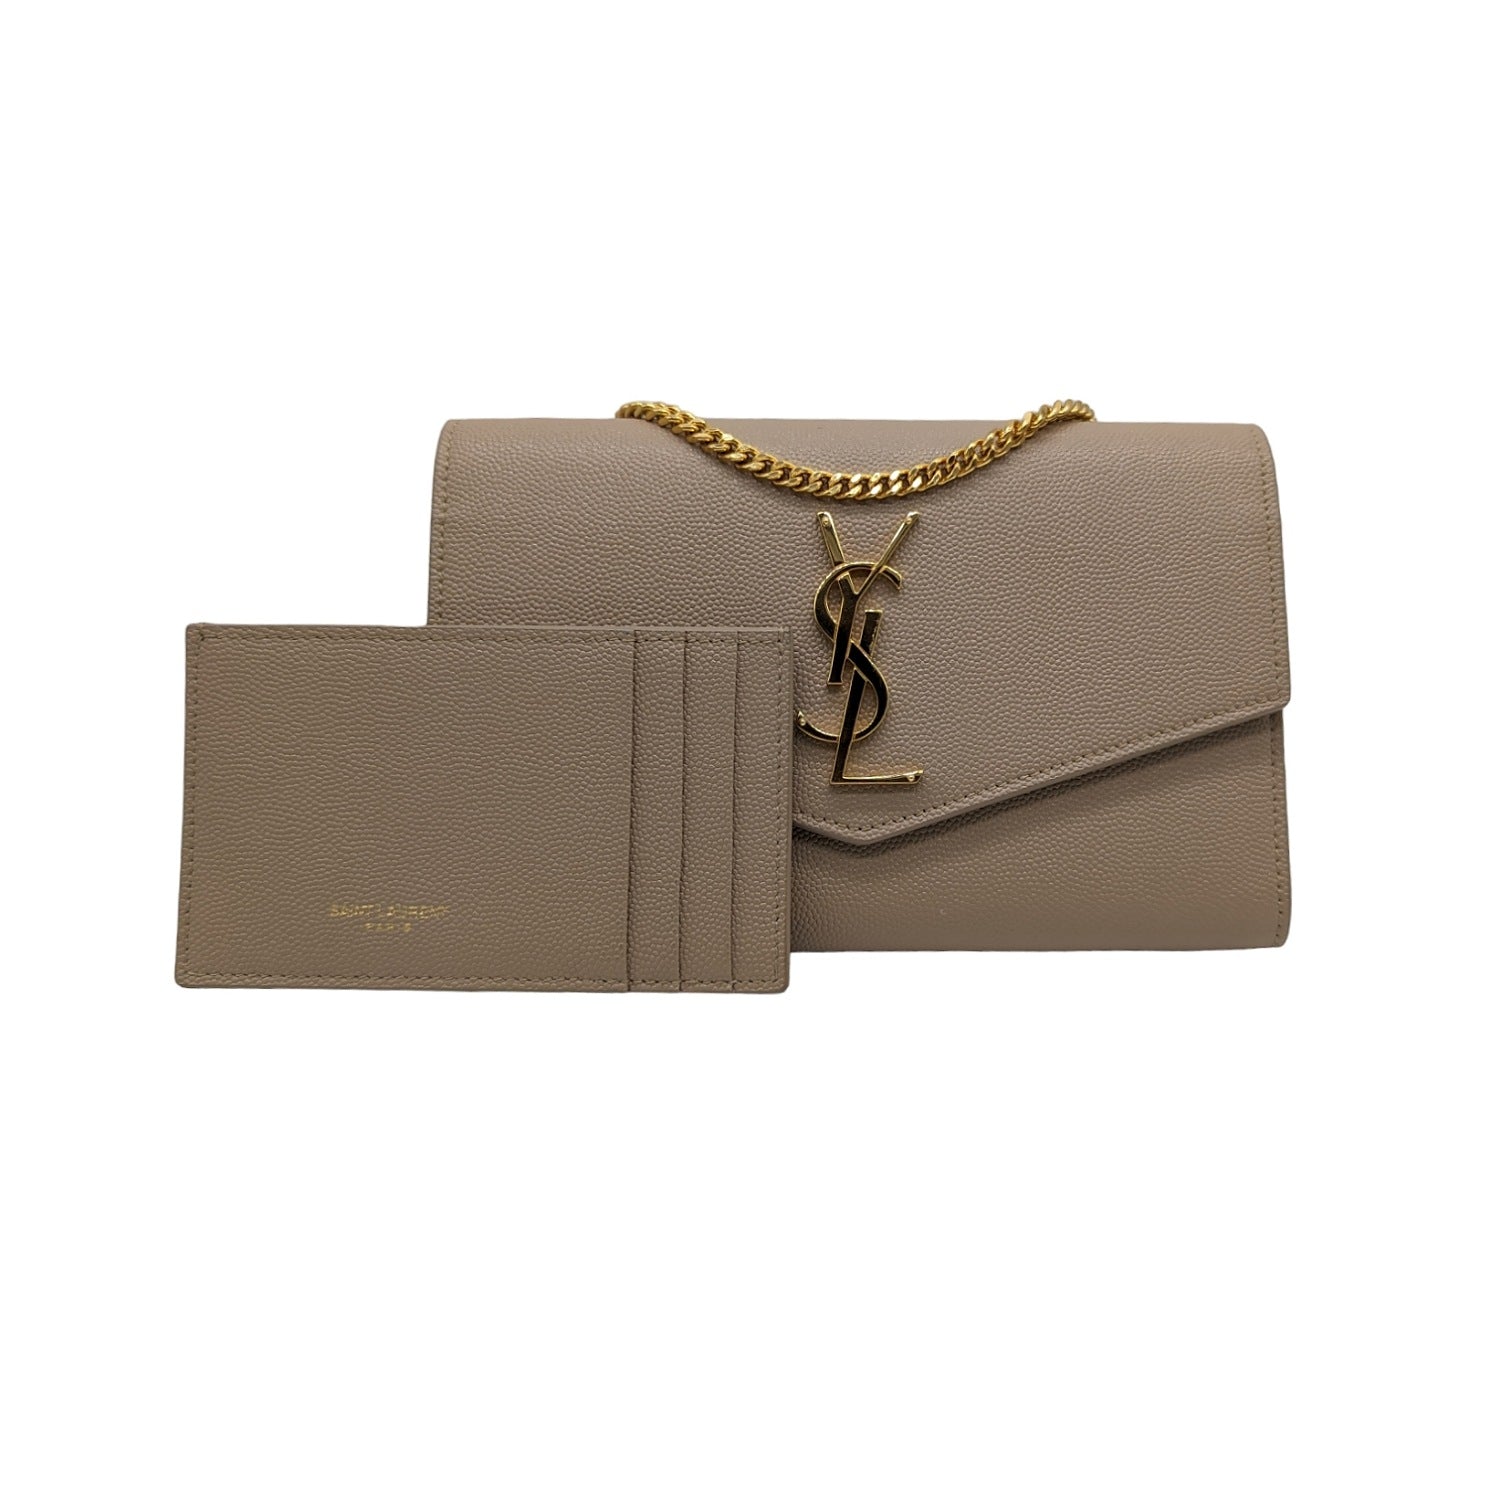 YSL Yves Saint Laurent Chain Wallet Bag Embossed Leather Poudre Beige Tan